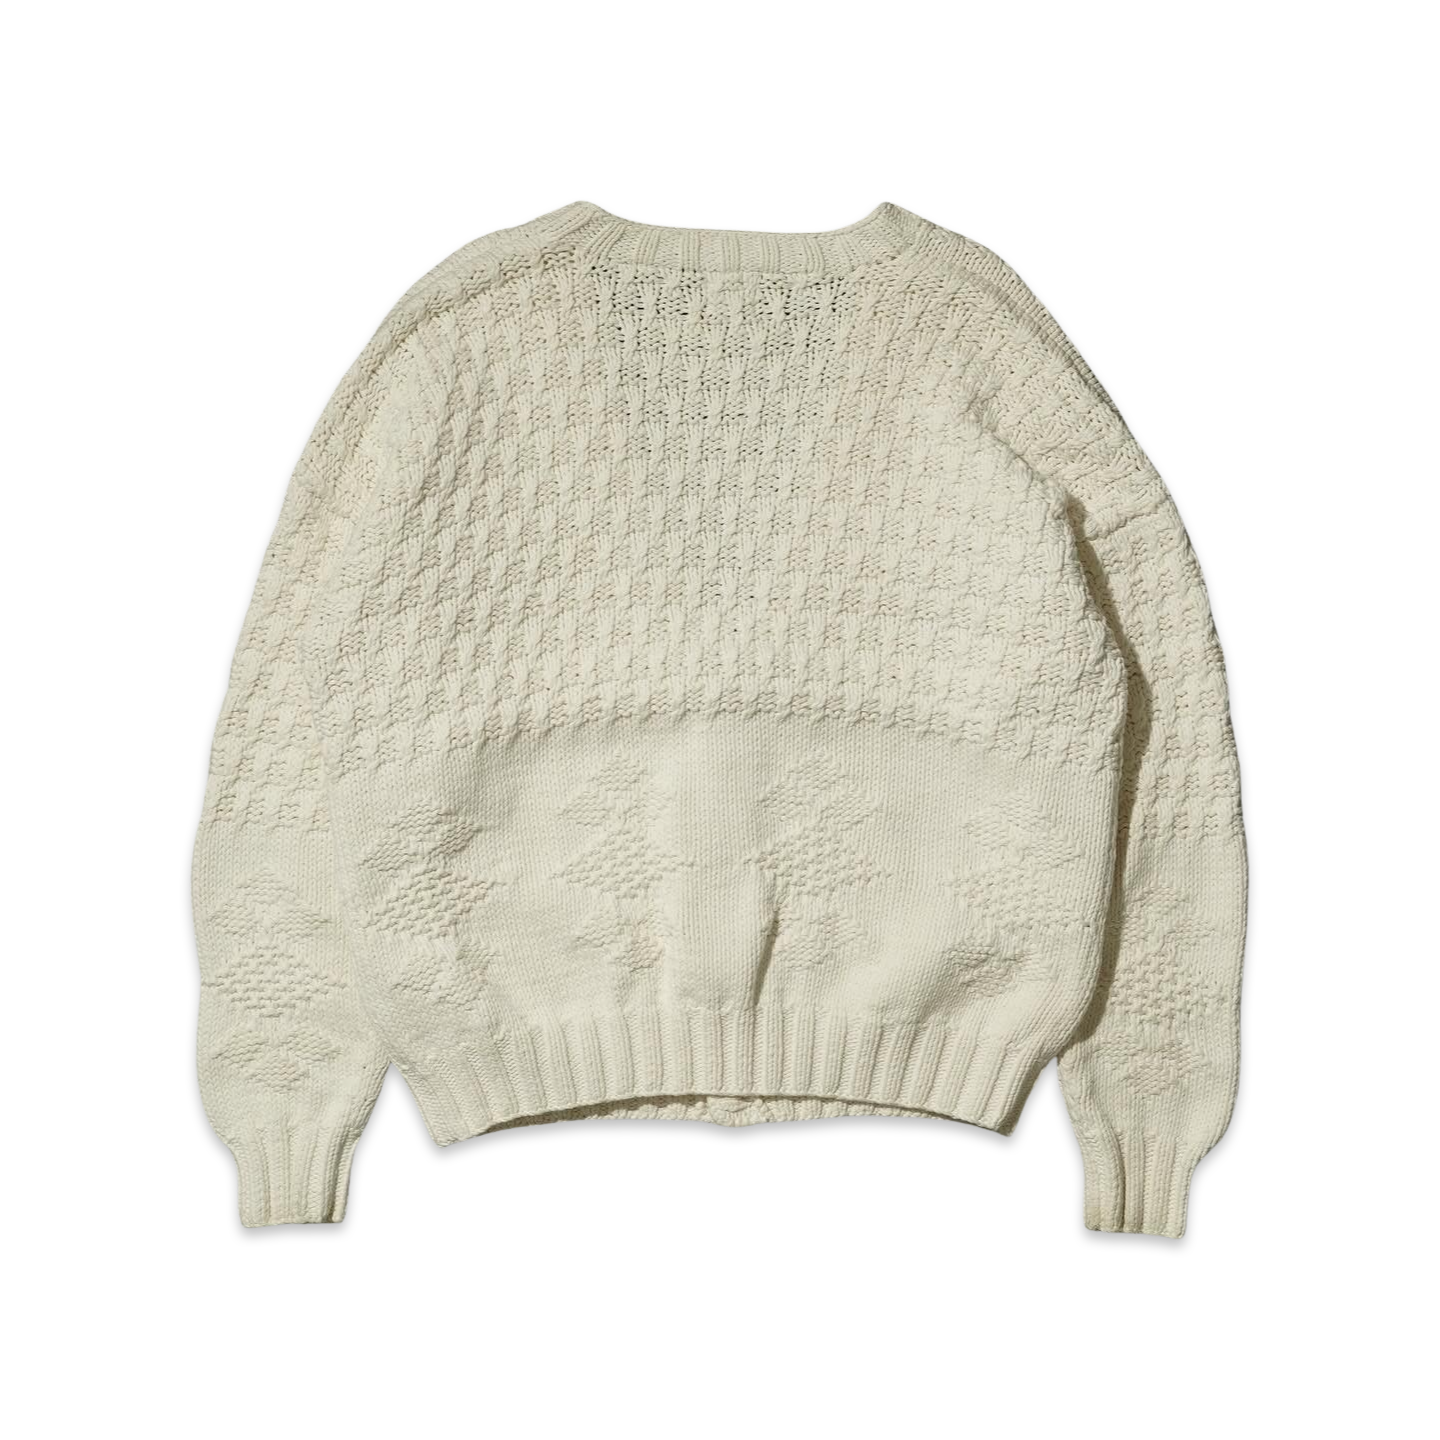 GAP Hand Knitted Cotton Cardigan